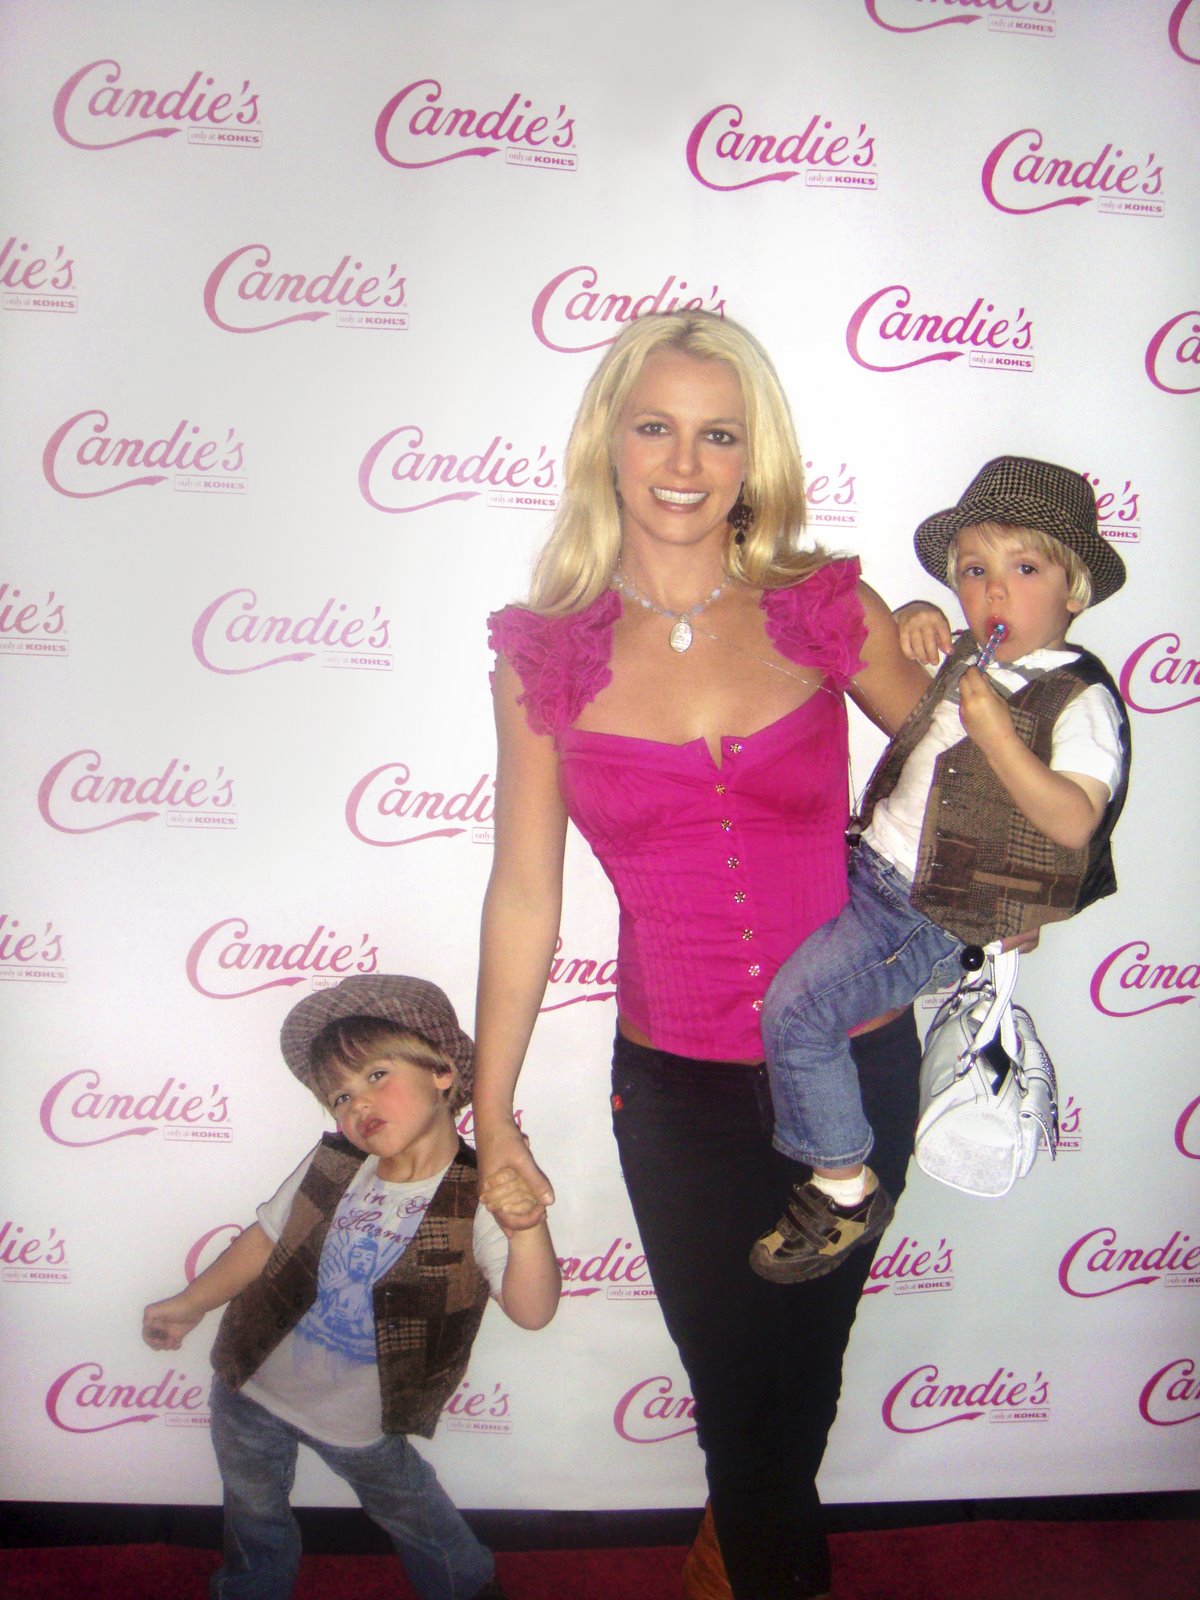 [britney-with-sons-candies.jpg]